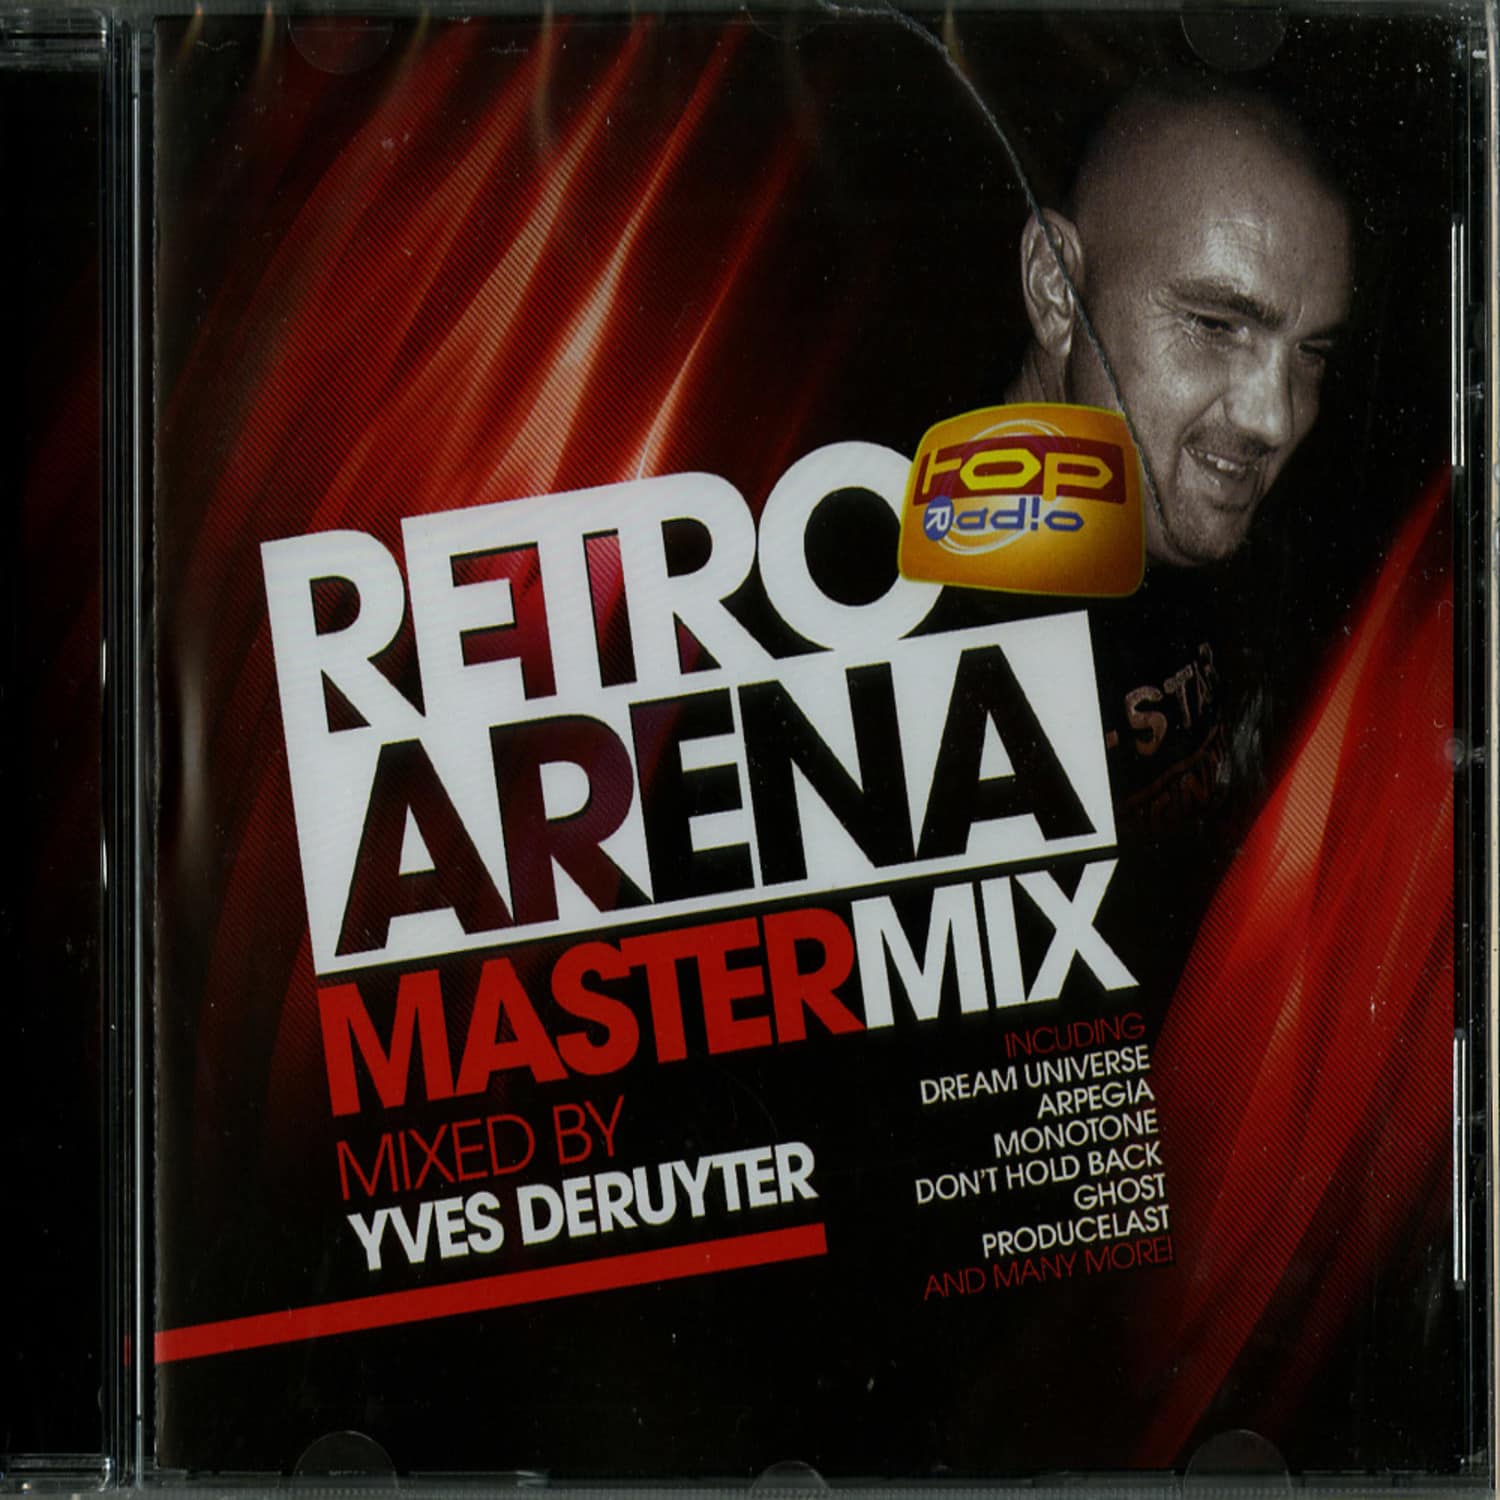 Various Artists - RETRO ARENA MASTER MIX - MIXED BY YVES DERUYTER 